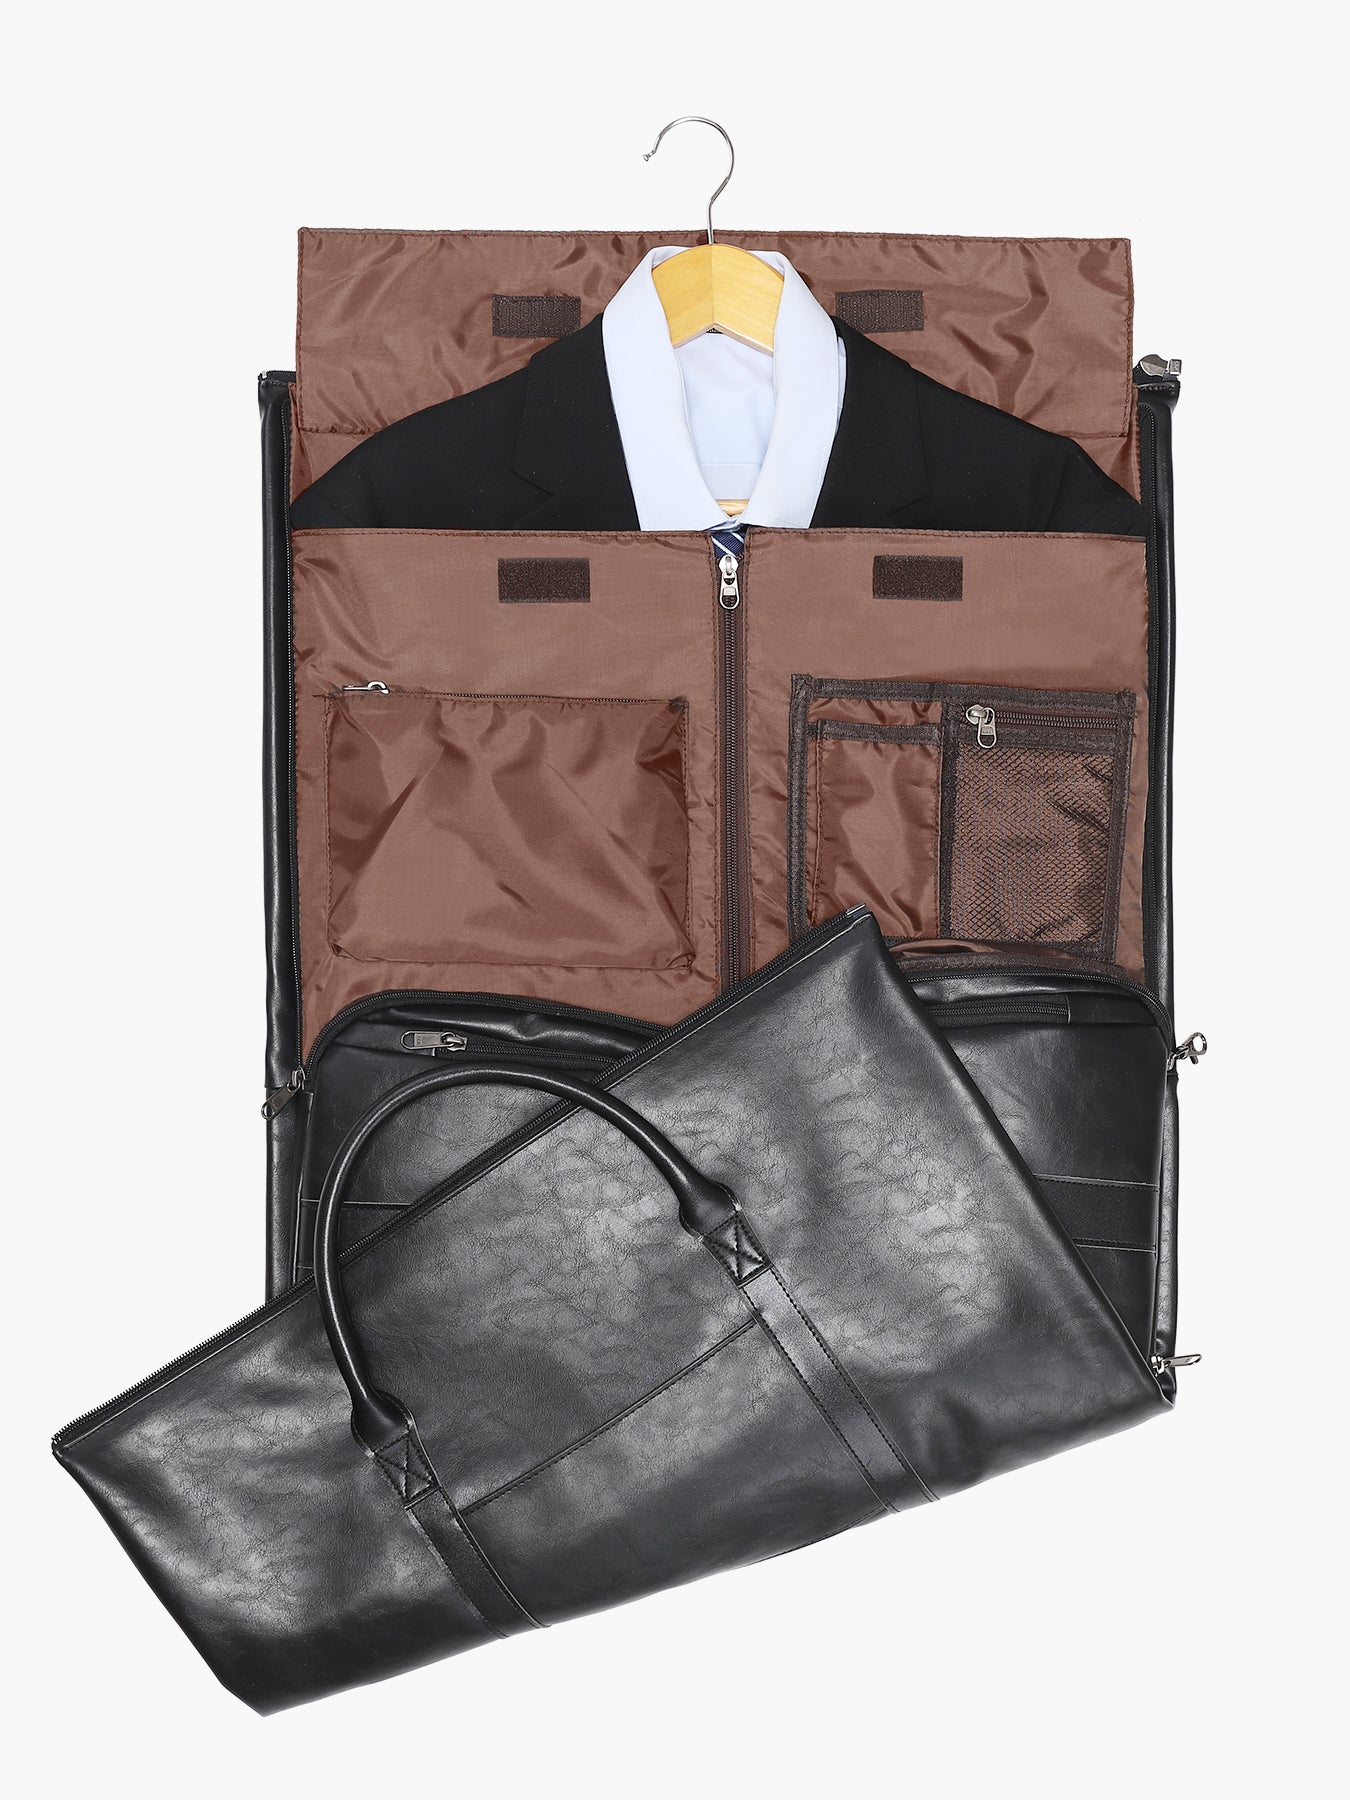 Convertible Carry on Garment Bag for Women,Leather